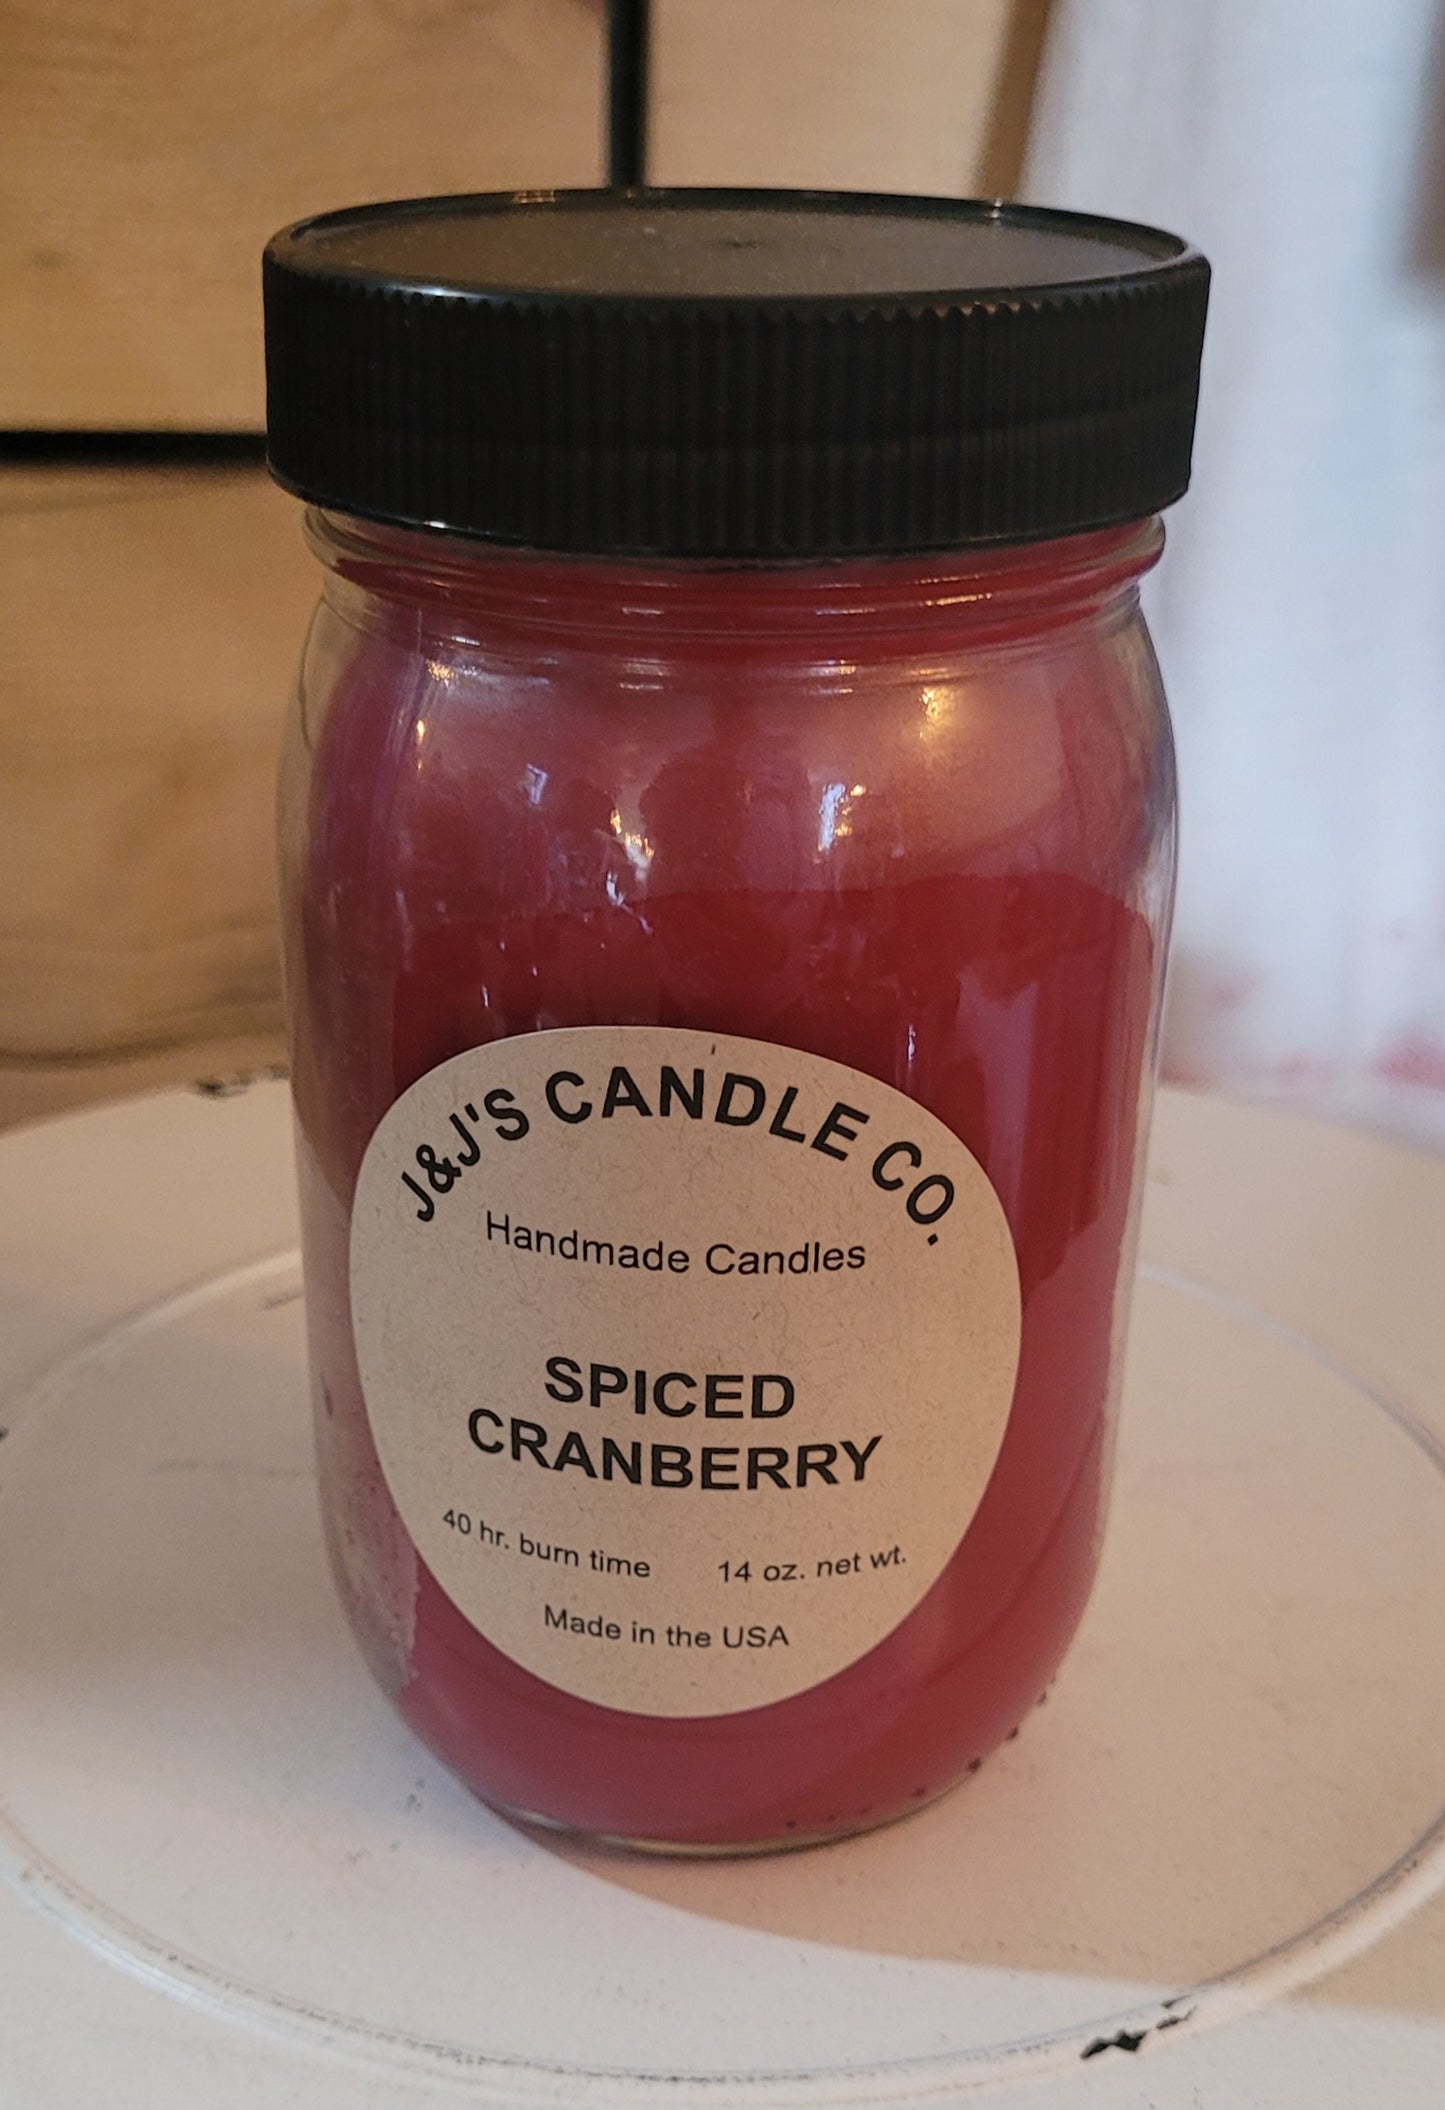 J& J's Candle Co. Spiced Cranberry